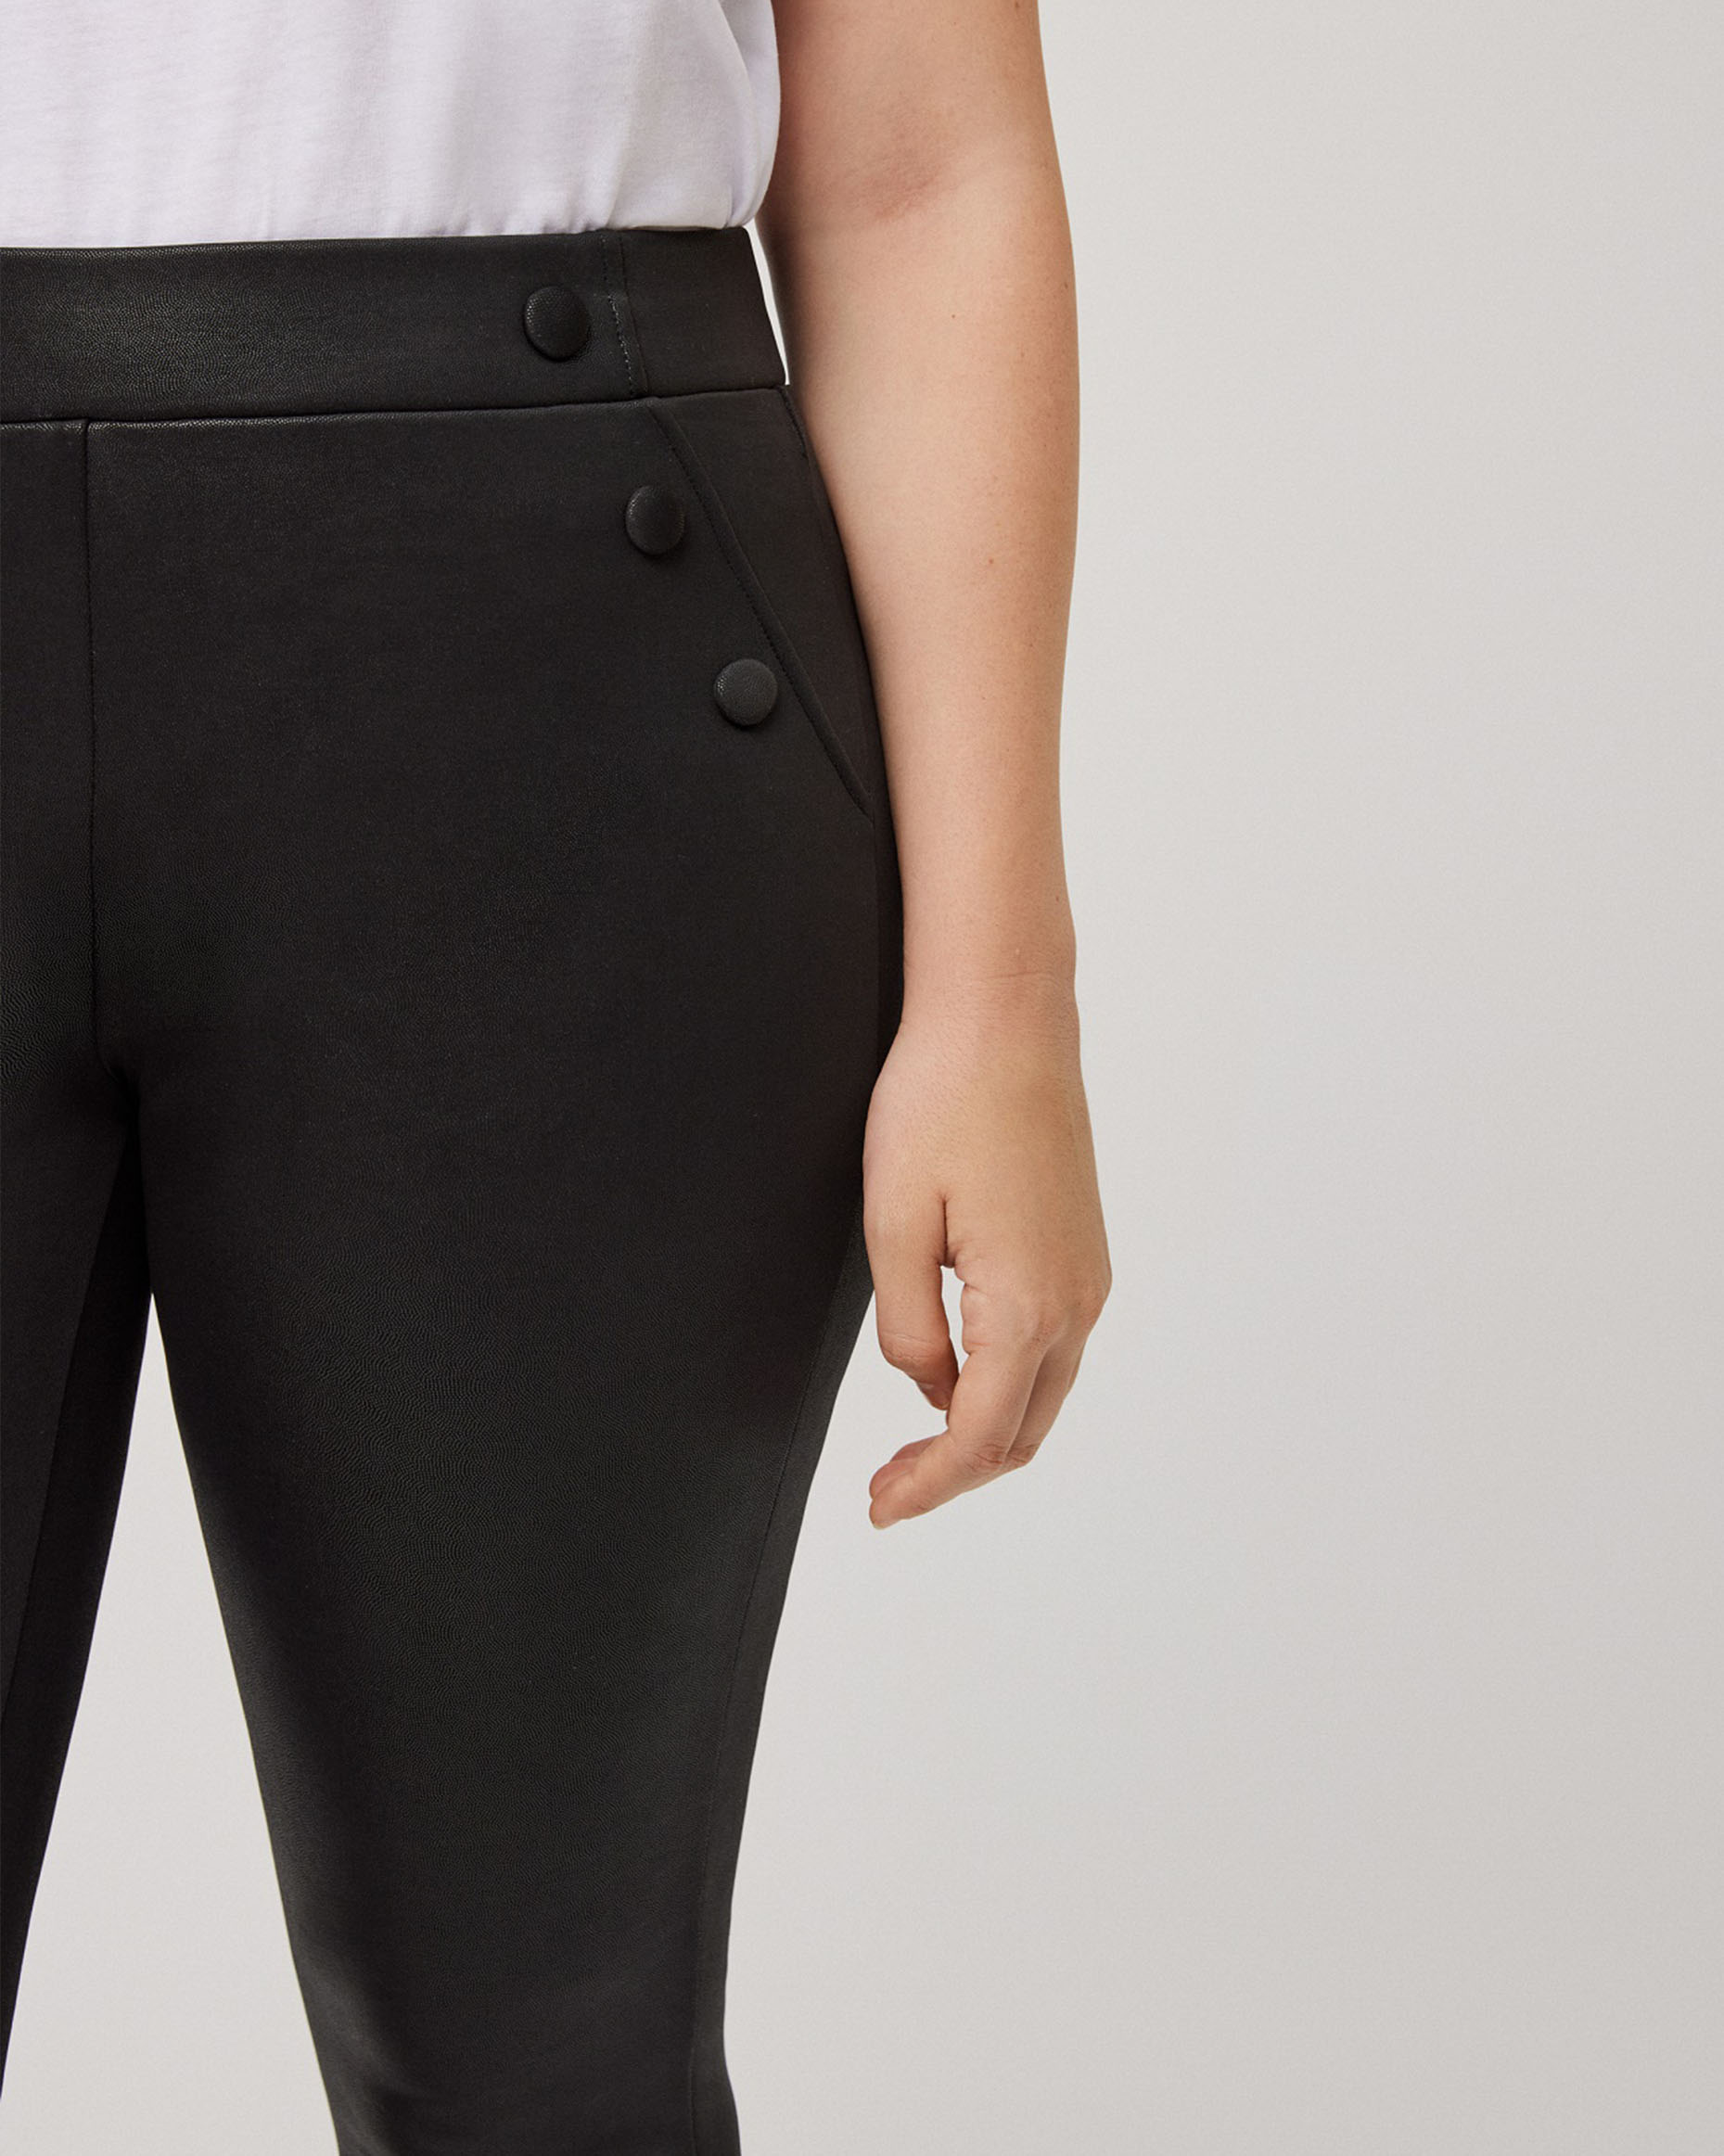 Ysabel Mora 70166 Waxed Thermal Leggings - High rise black trouser leggings with waxed effect finish, warm fleece lining, faux front pockets with covered buttons and deep elasticated waistband.